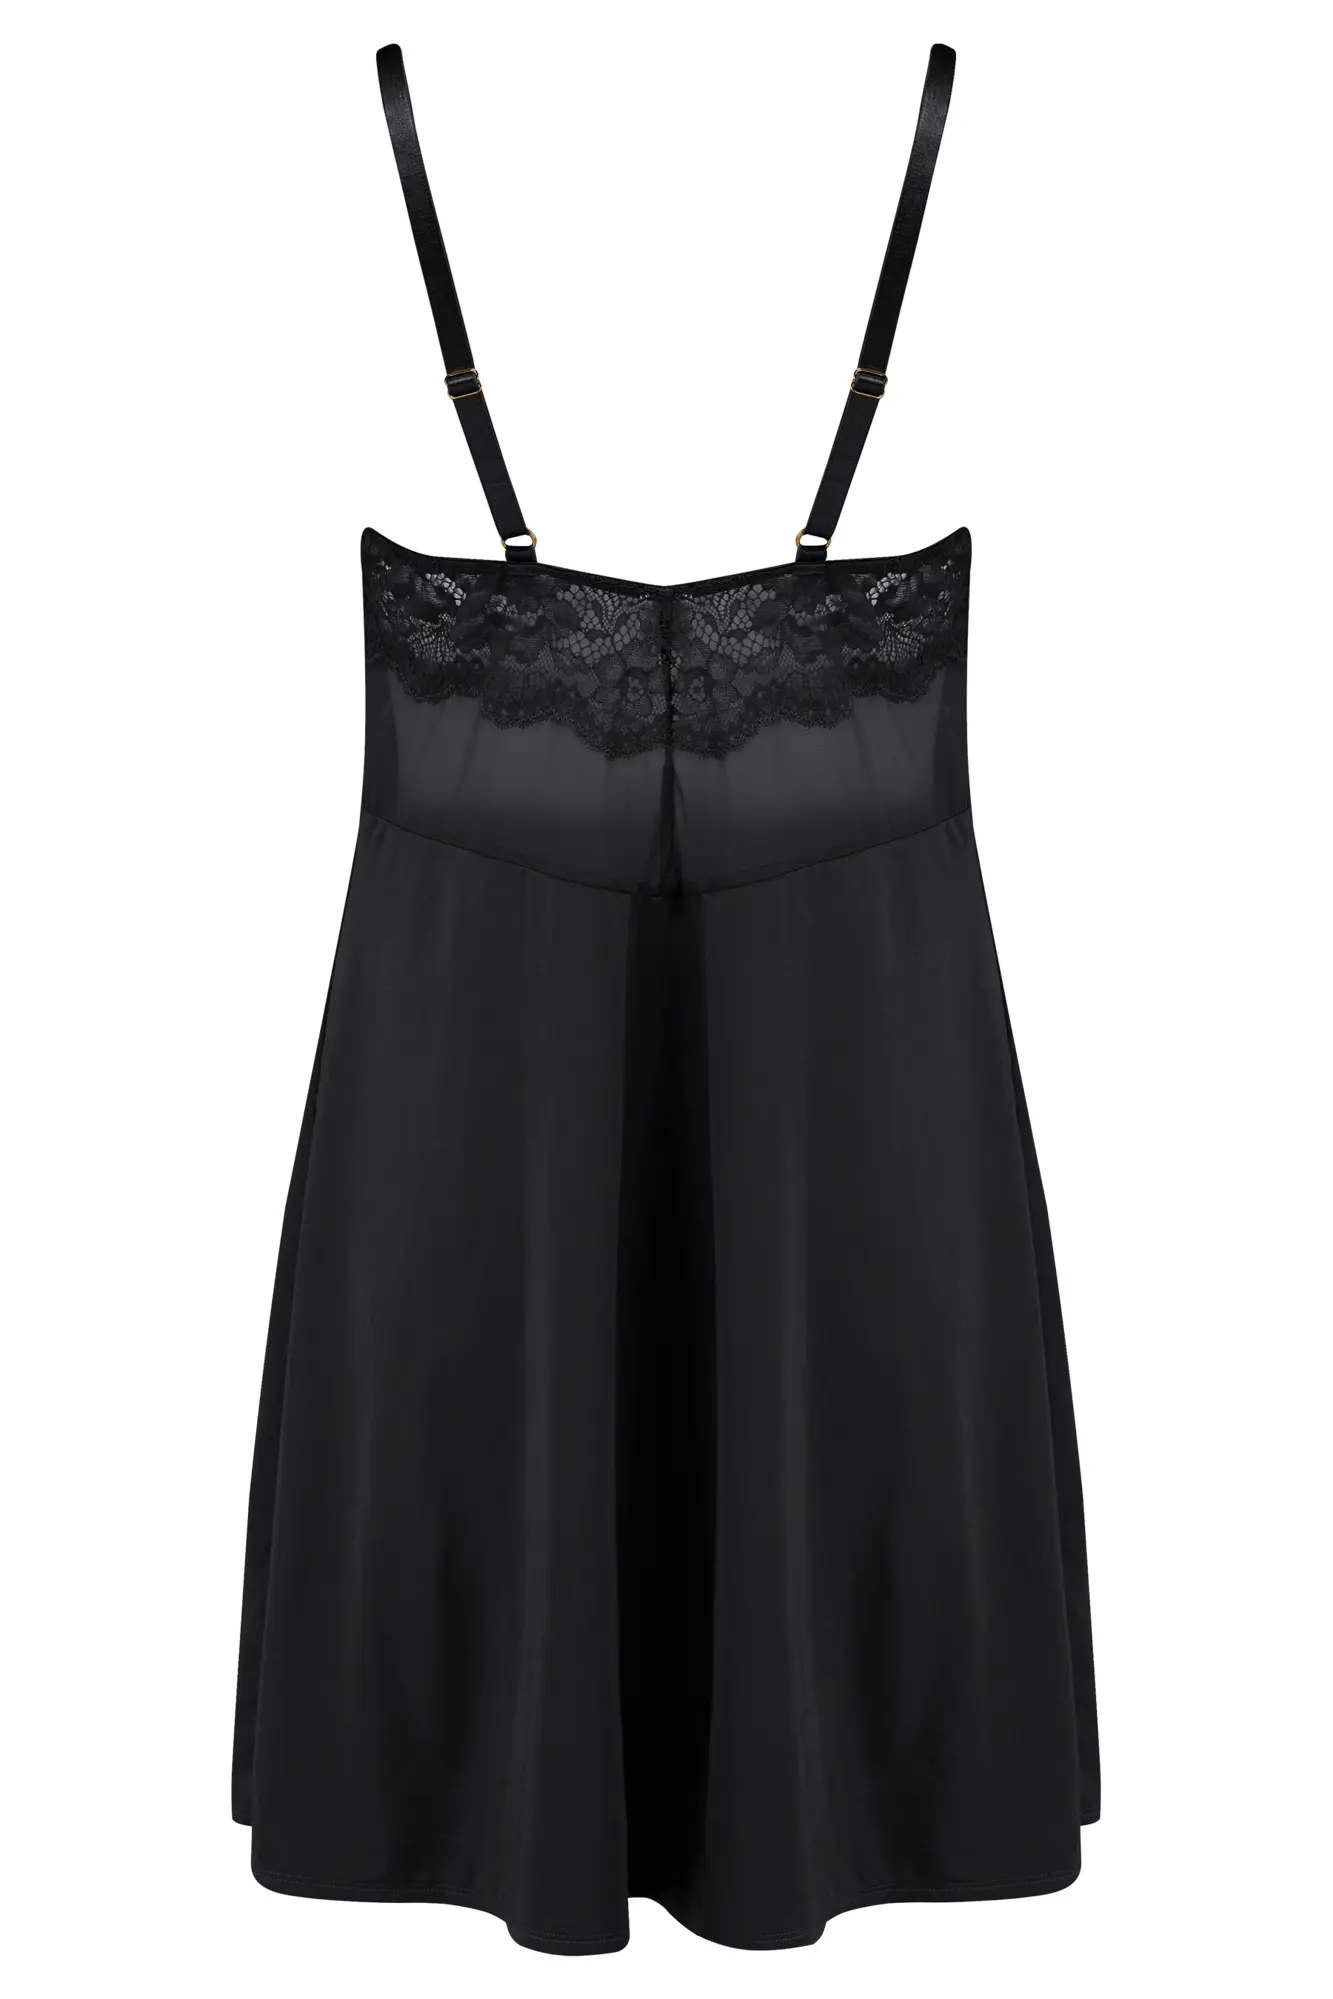 Buy Pour Moi Black Lavish Underwired Babydoll Chemise from the